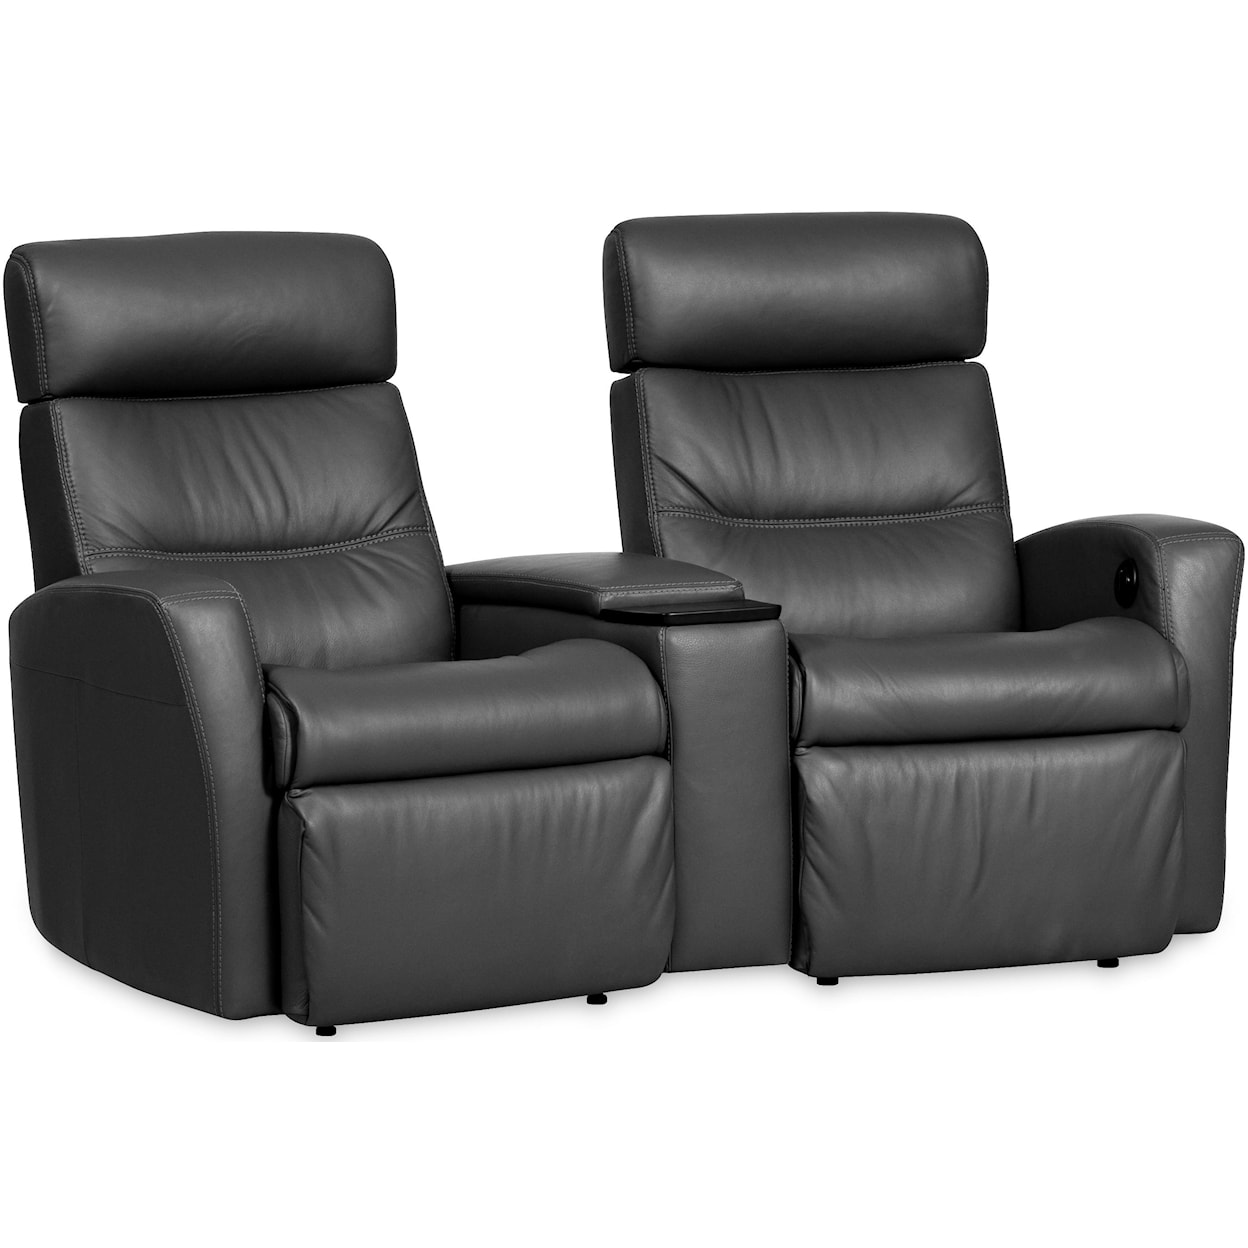 IMG Norway Divani  Home Theater Seating